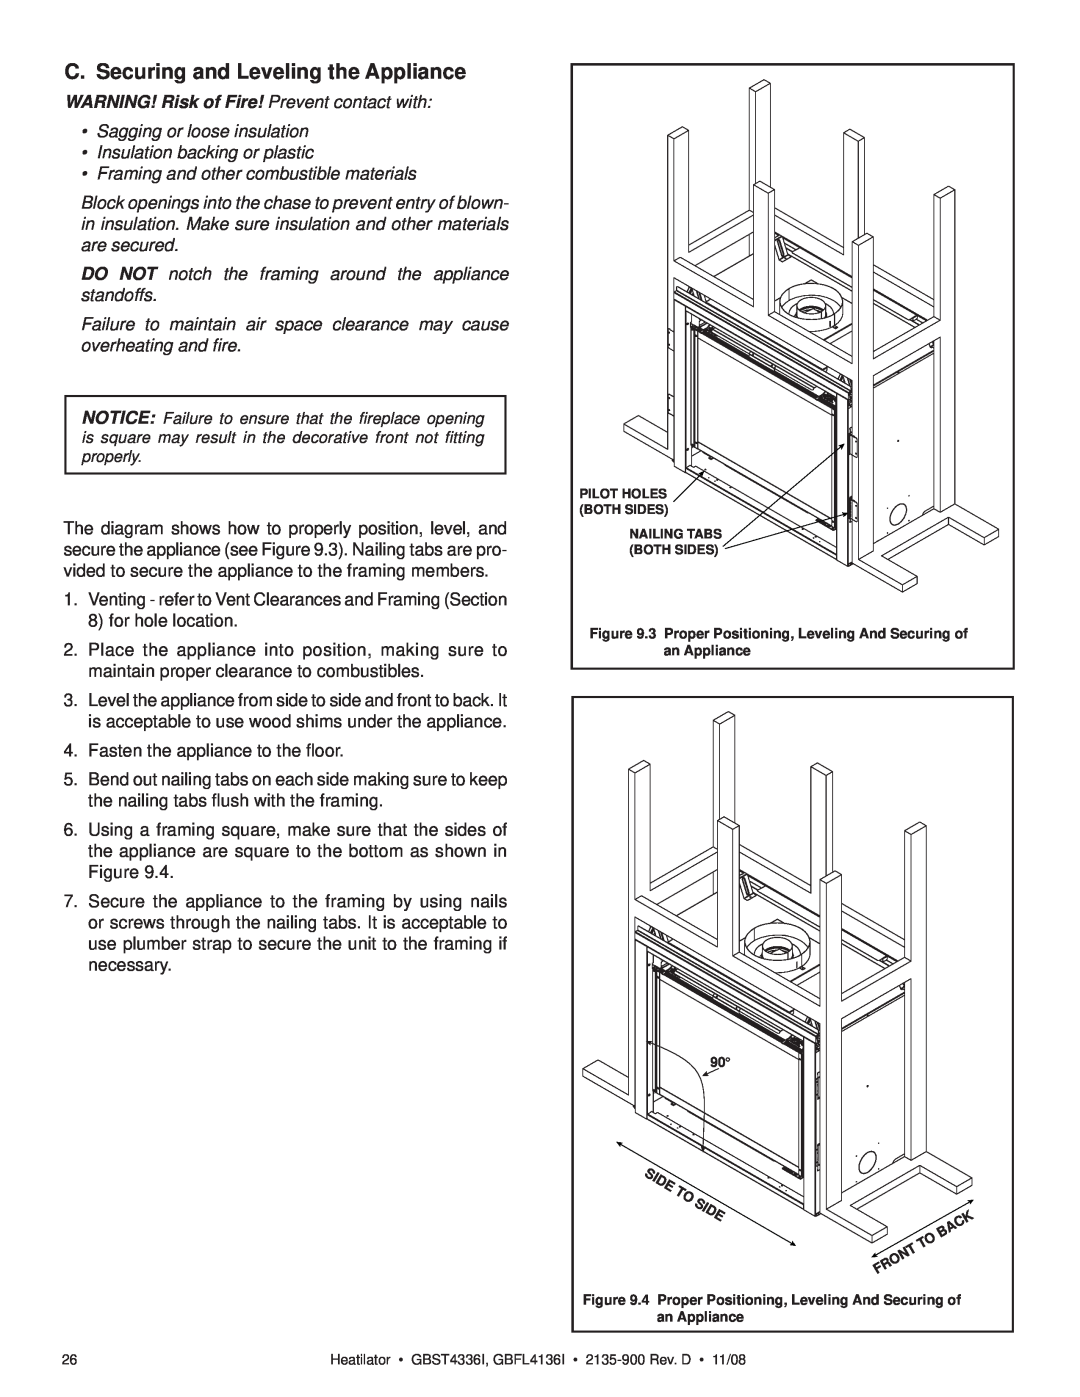 Hearth and Home Technologies GBFL4136I C. Securing and Leveling the Appliance, WARNING! Risk of Fire! Prevent contact with 